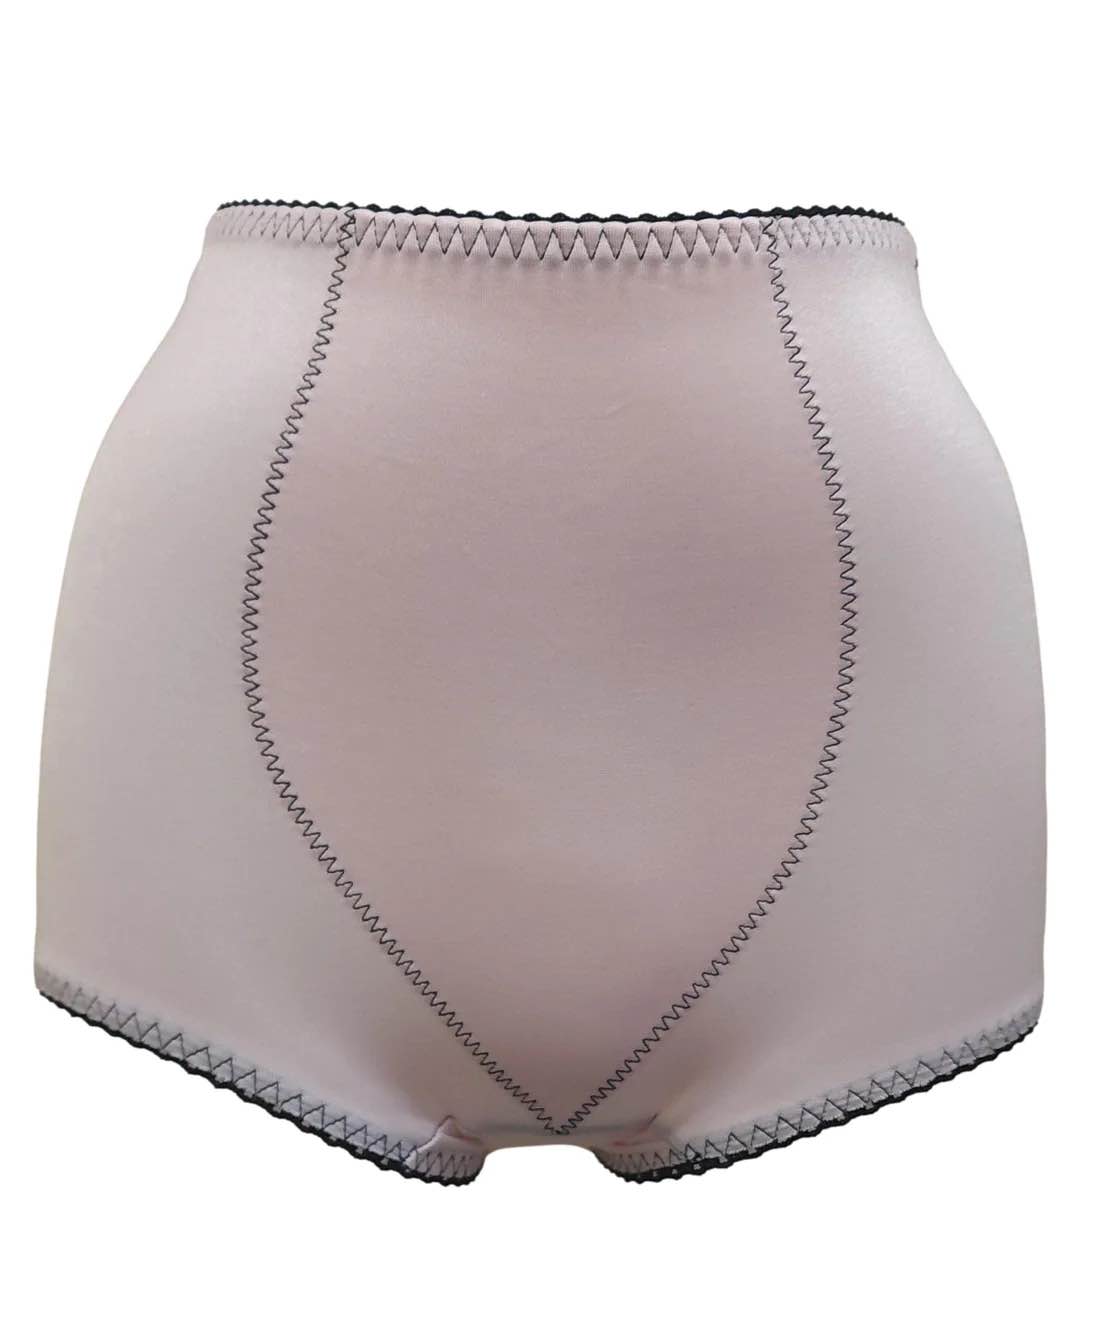 The front of the pink Rear Padded High Waist Panty.